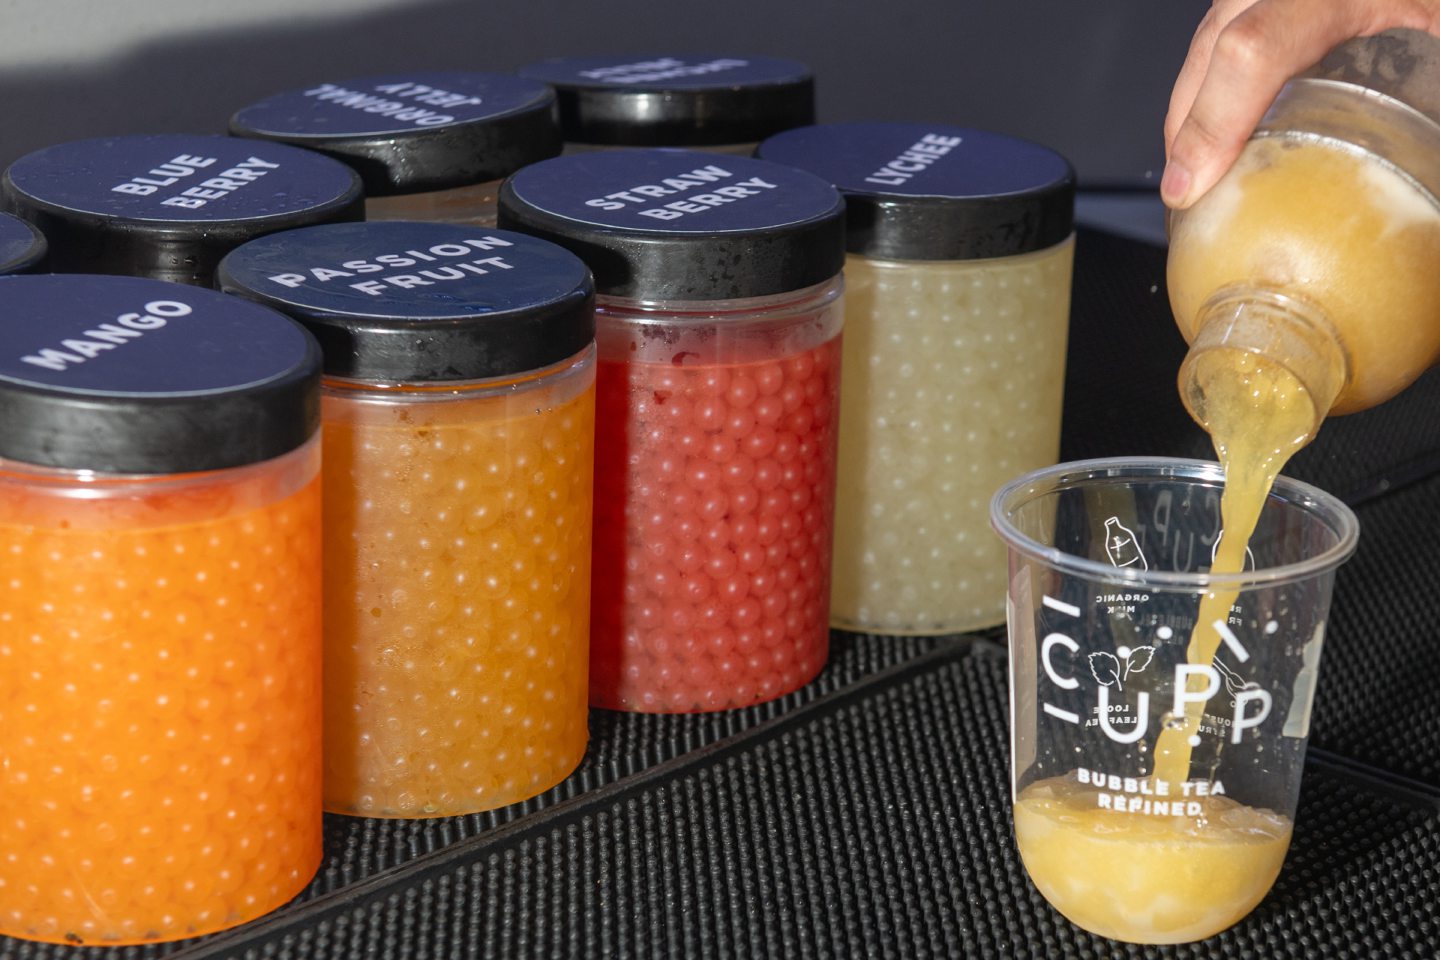 Variety of tapioca pearl flavours available at CUPP Bubble Tea.